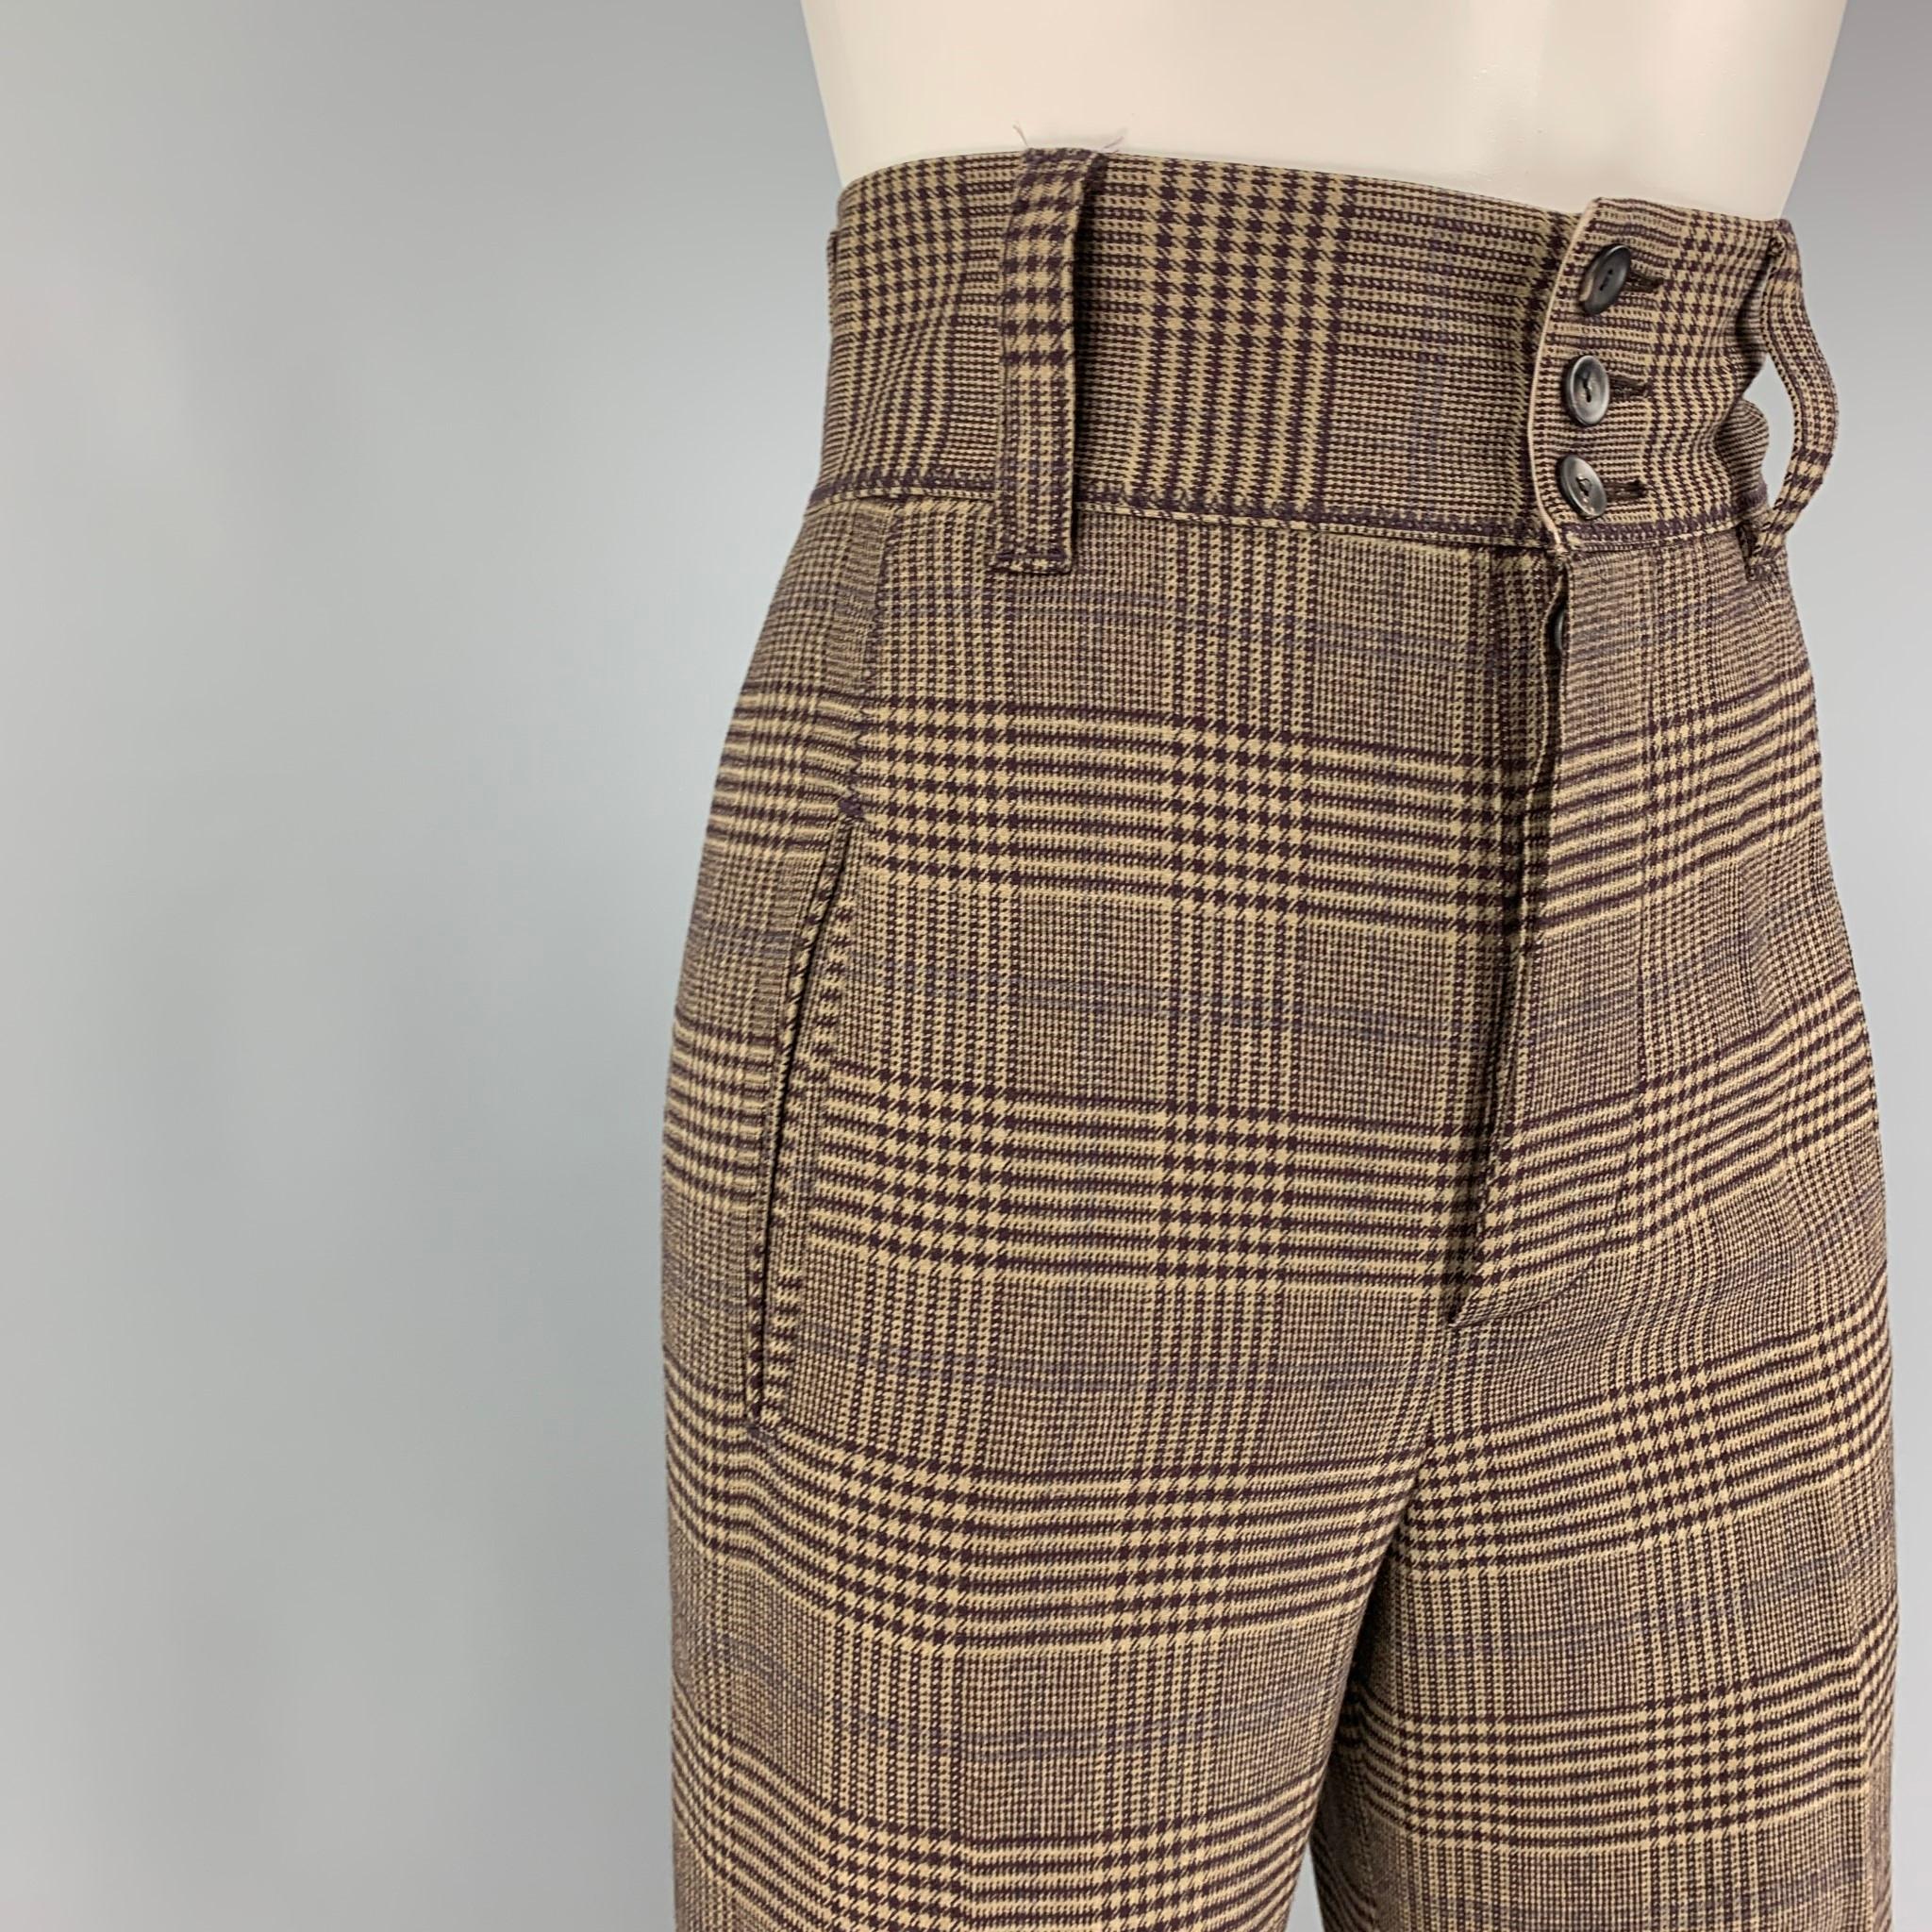 GAULTIER2 by JEAN PAUL GAULTIER dress pants comes in a brown & tan plaid wool / rayon featuring a high waisted style, cuffed, and a button fly closure. Made in Italy. 

Very Good Pre-Owned Condition.
Marked: I 40 / D 36 / F 36 / GB 8 / USA